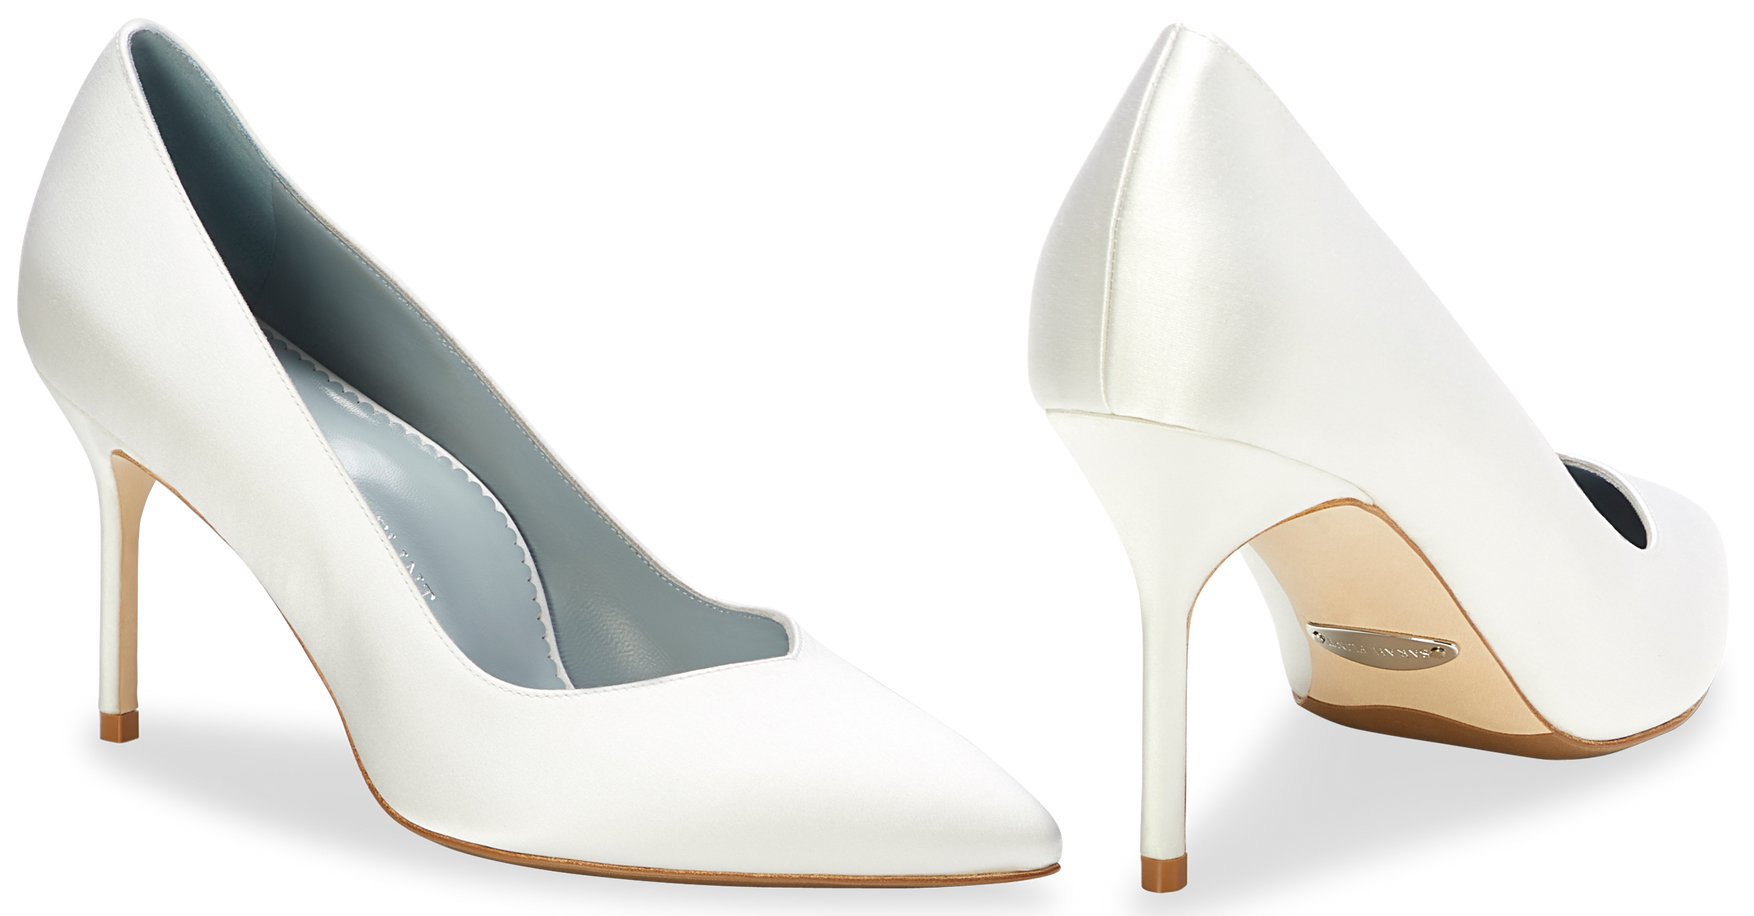 Literally the perfect wedding pump, this Sarah Flint design is made from water-resistant satin and features extra padding, anatomical arch support, and a wider toe box